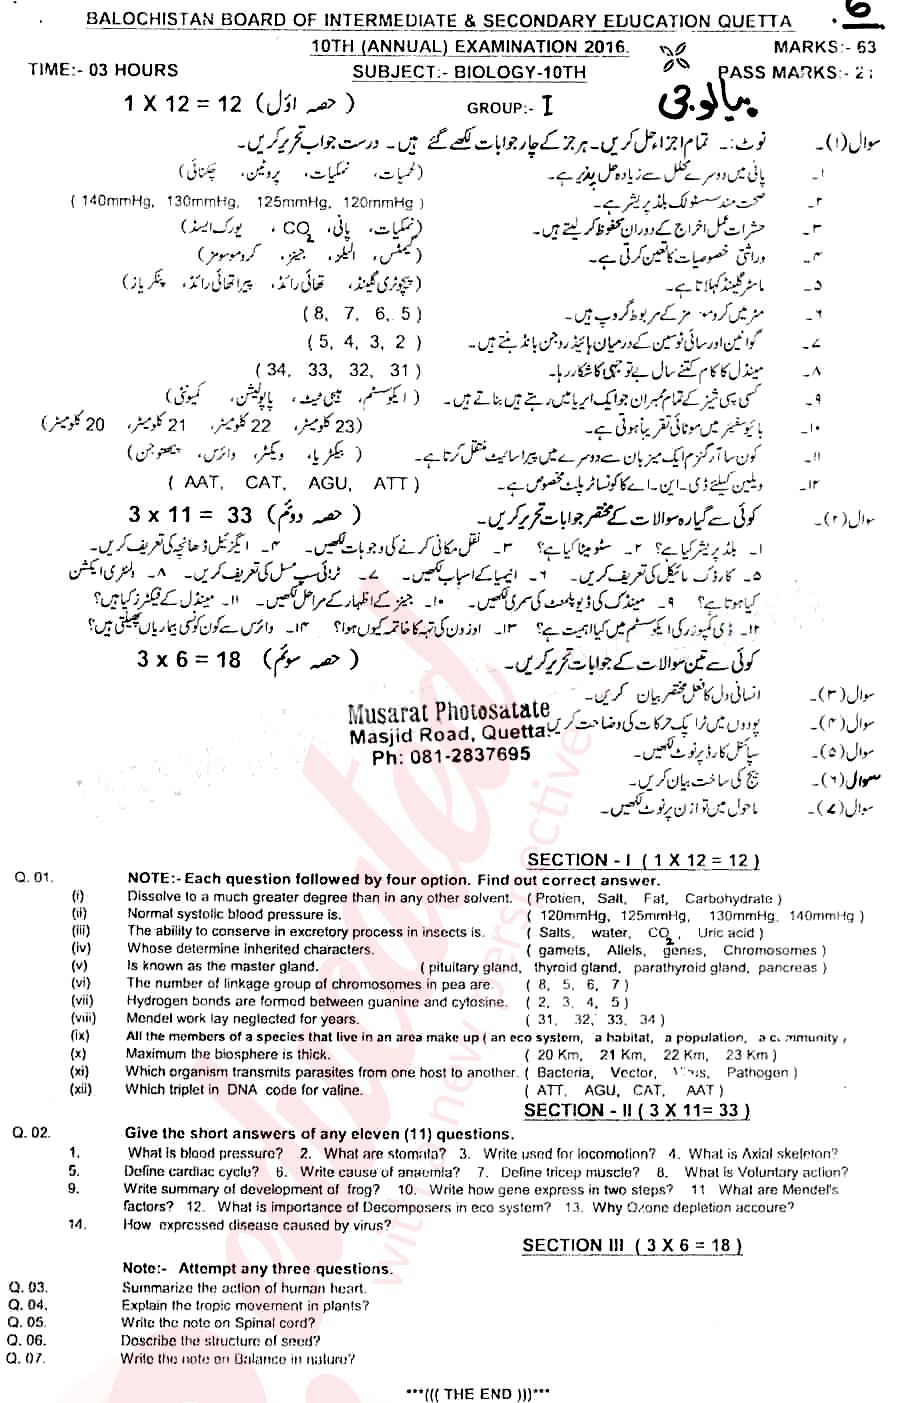 Biology 10th class Past Paper Group 1 BISE Quetta 2016